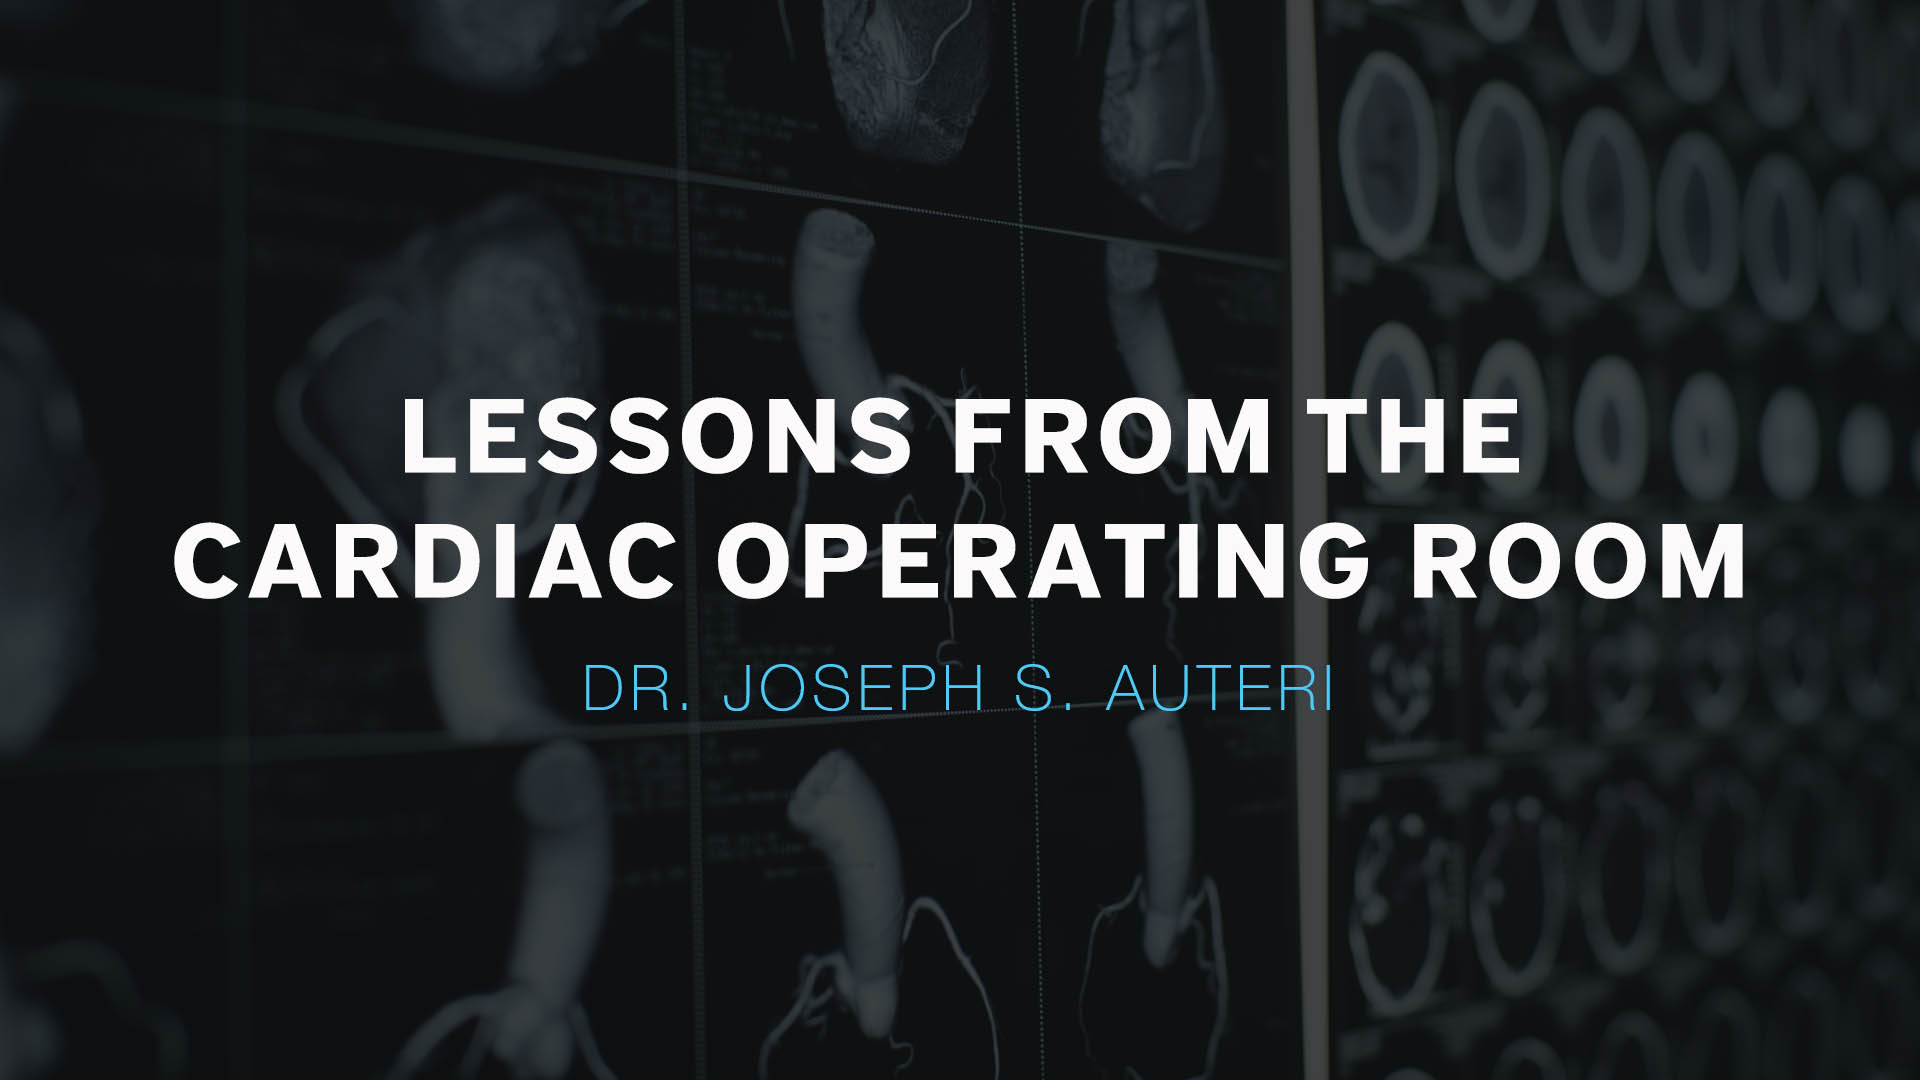 Lessons from the Cardiac Operating Room